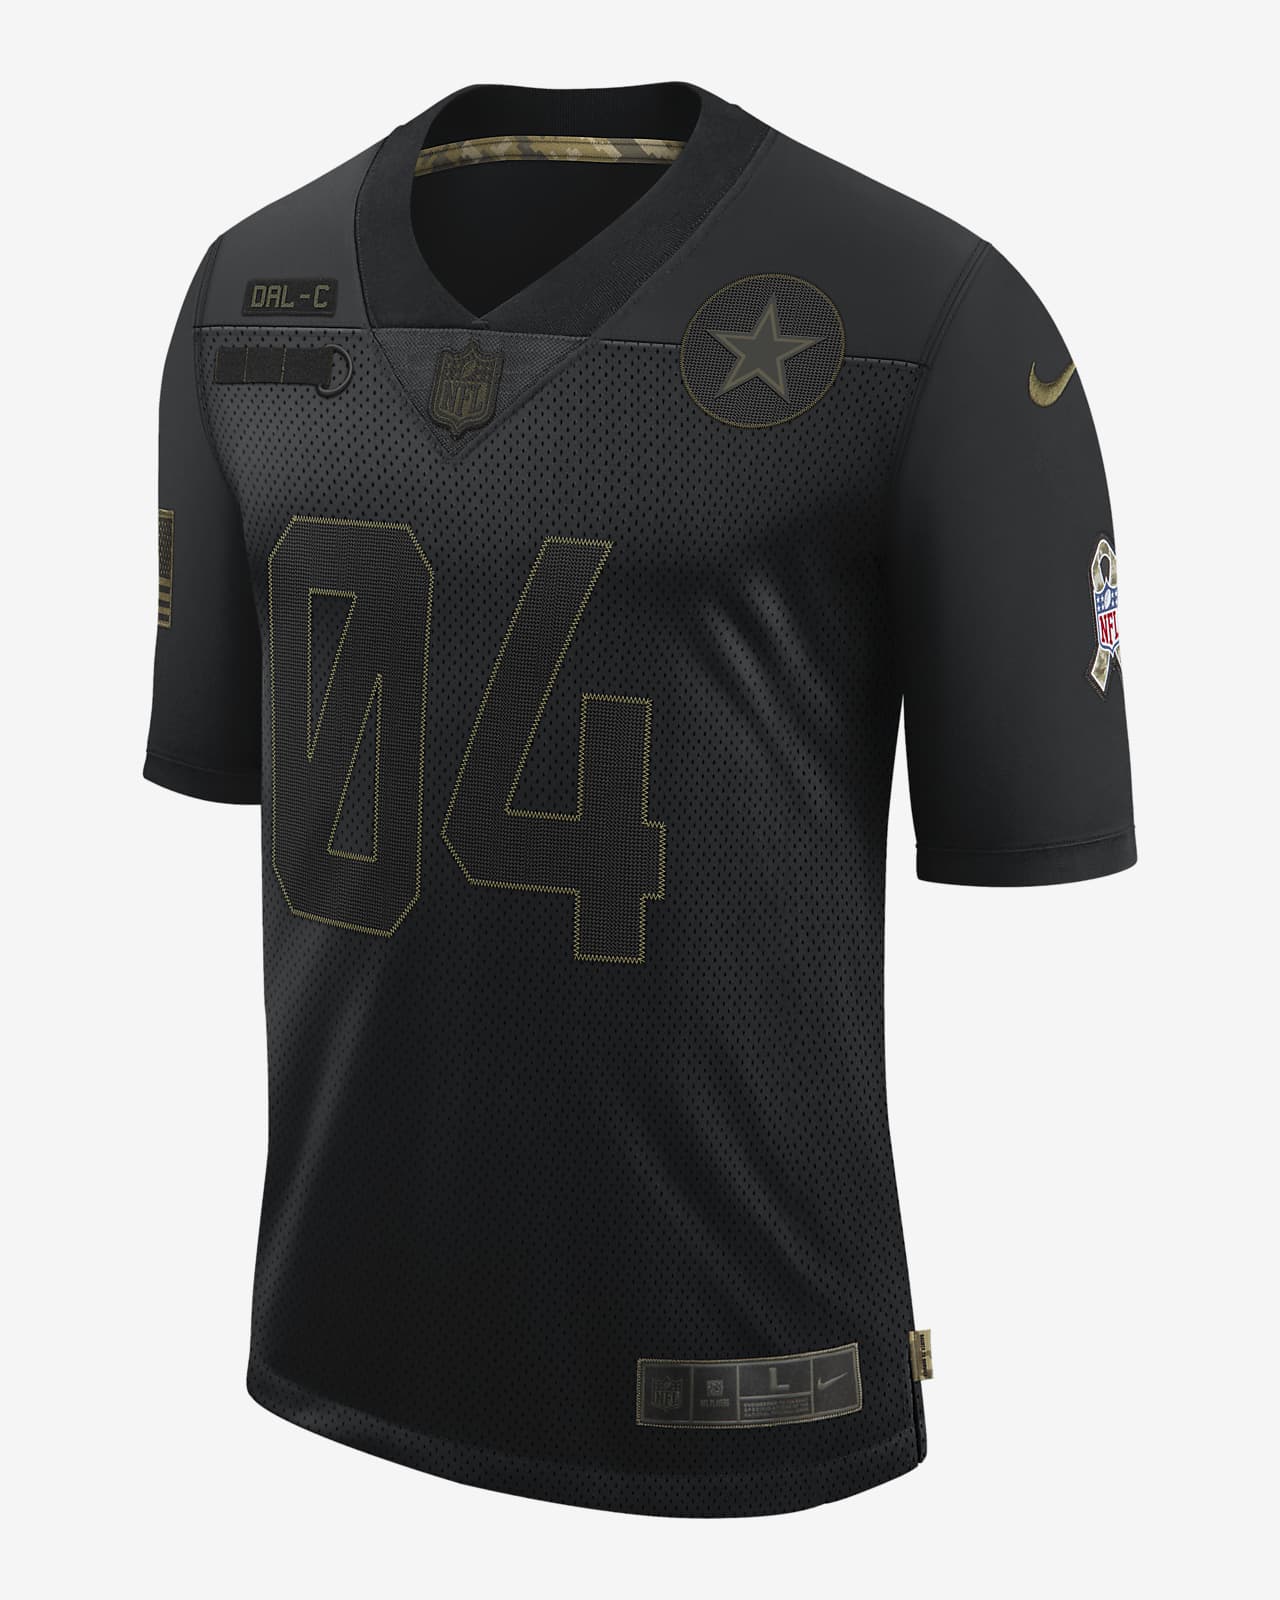 cowboys therma jersey